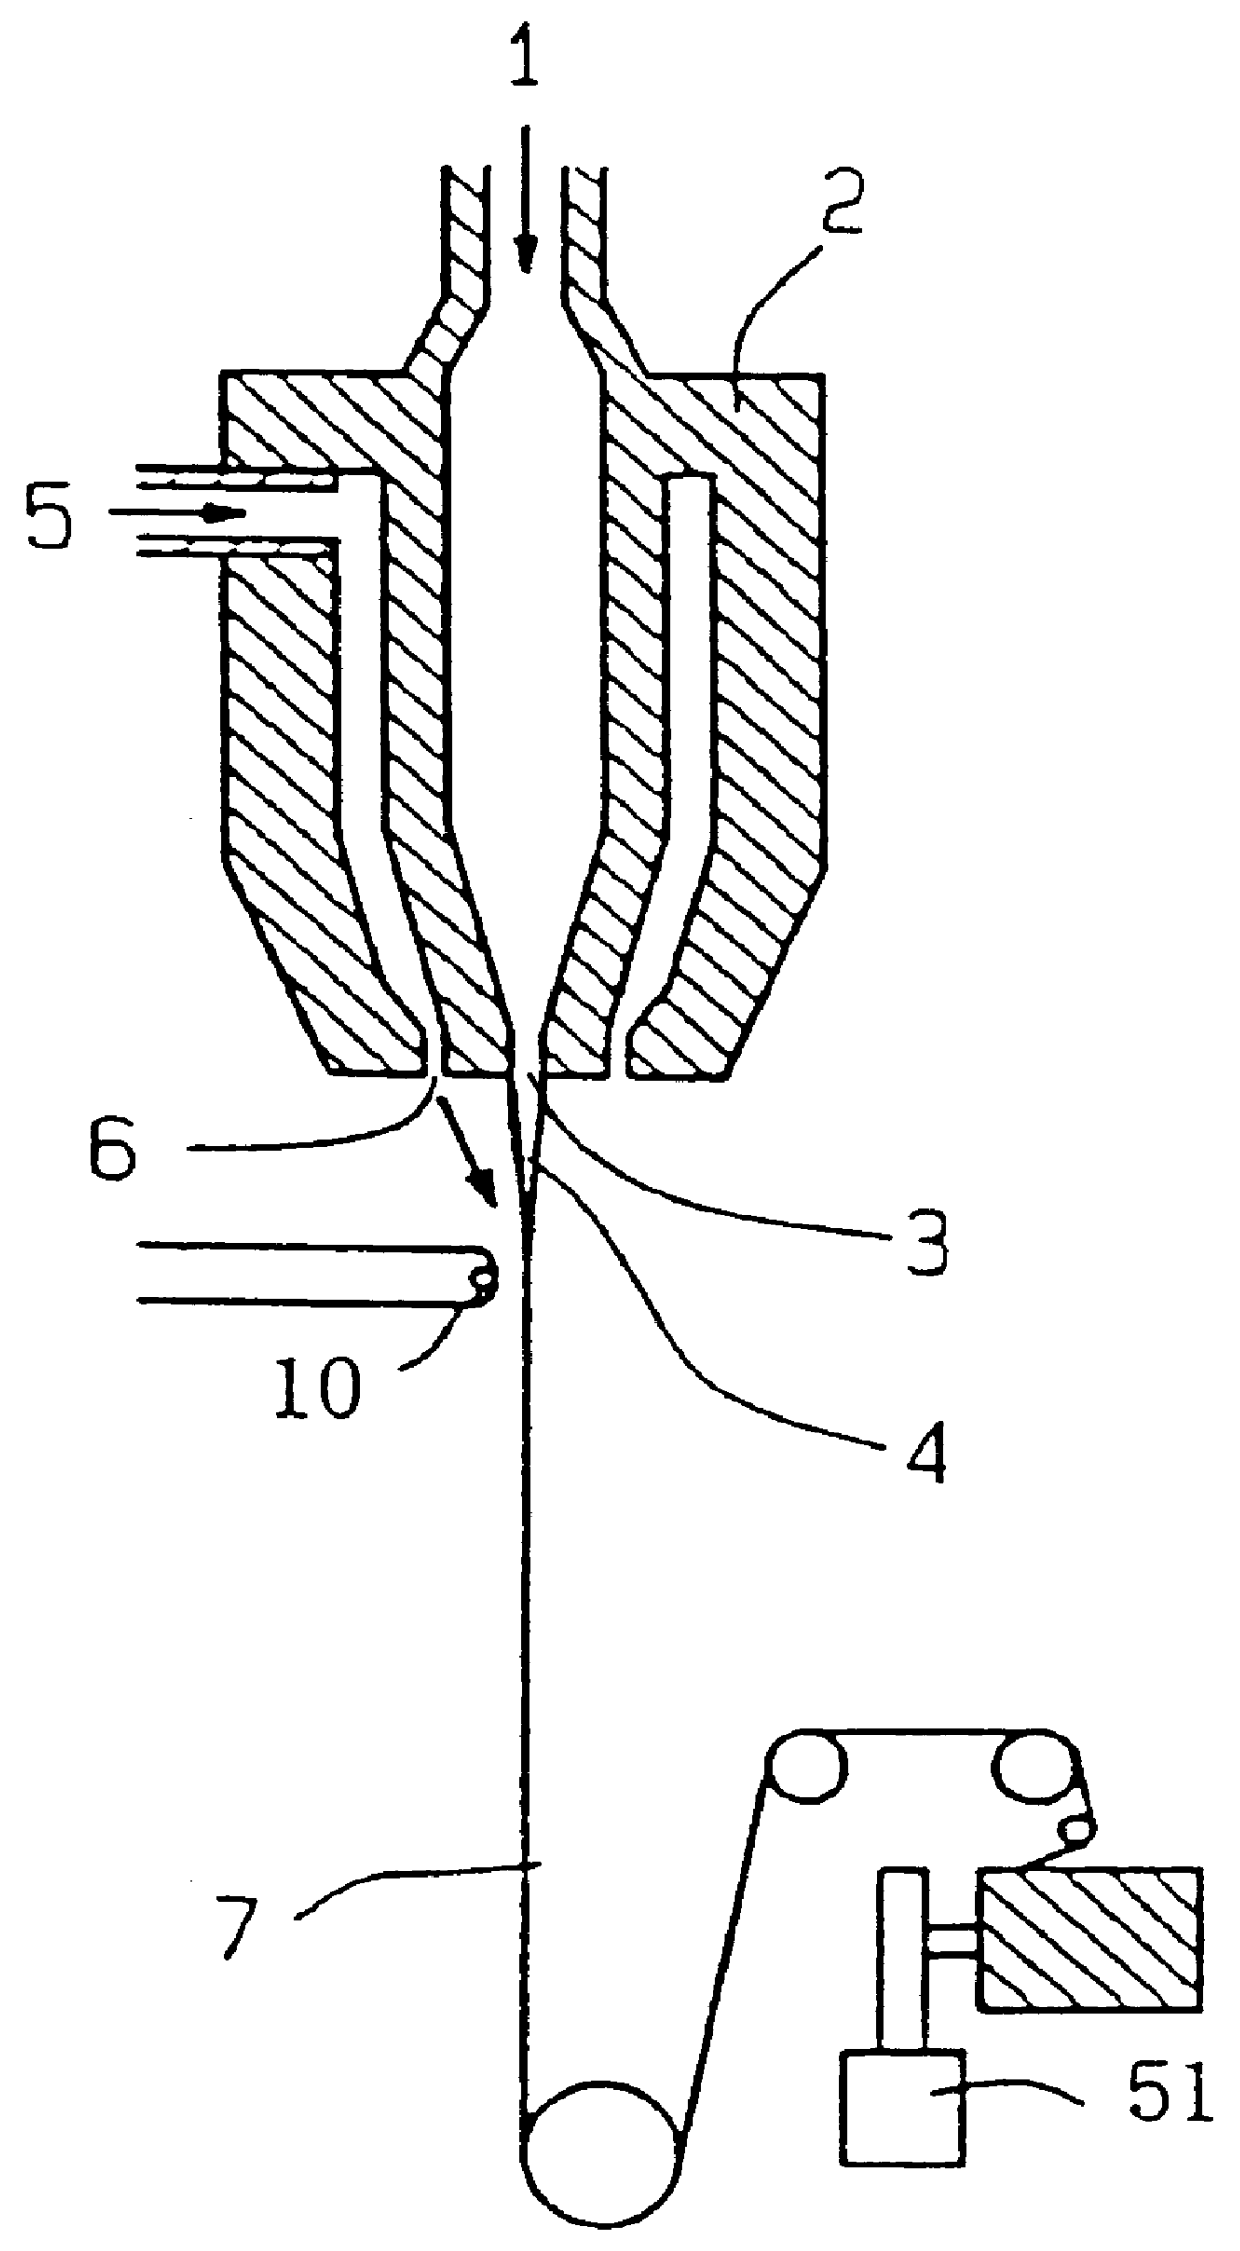 Process for producing filament and filament assembly composed of thermotropic liquid crystal polymer